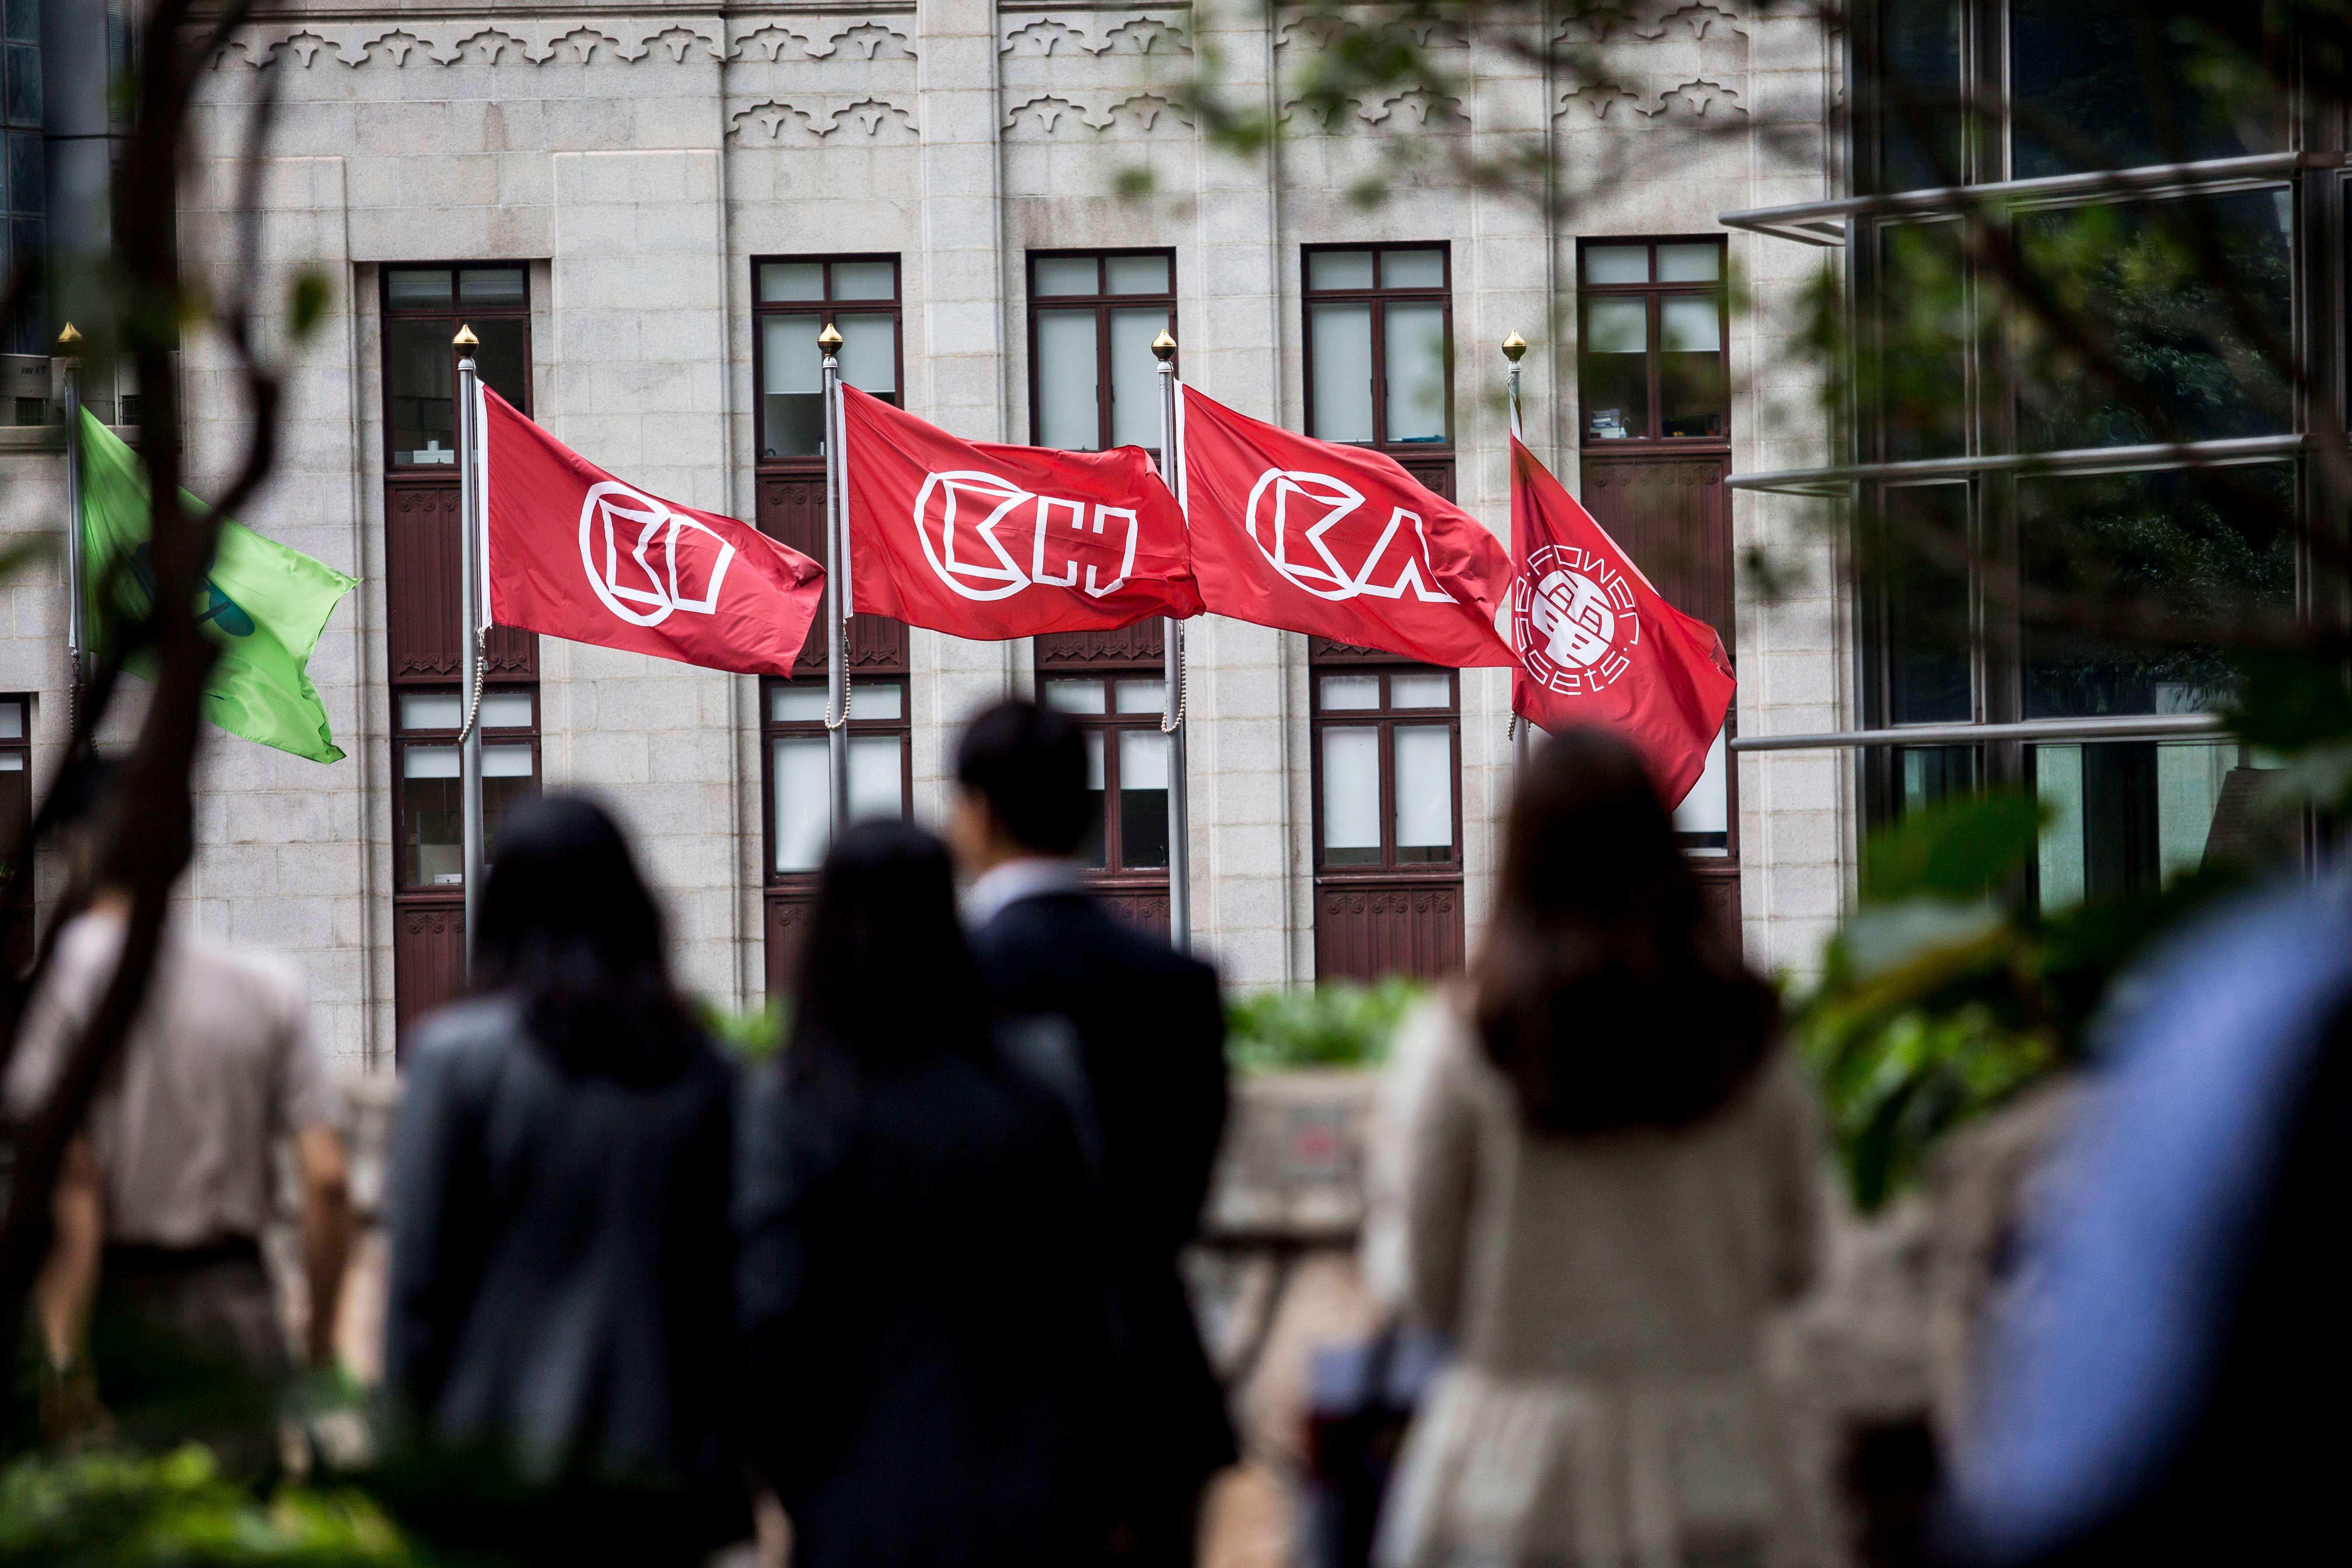 CK Hutchison Holdings flags are displayed outside the company’s headquarters in Hong Kong. Photo: AFP